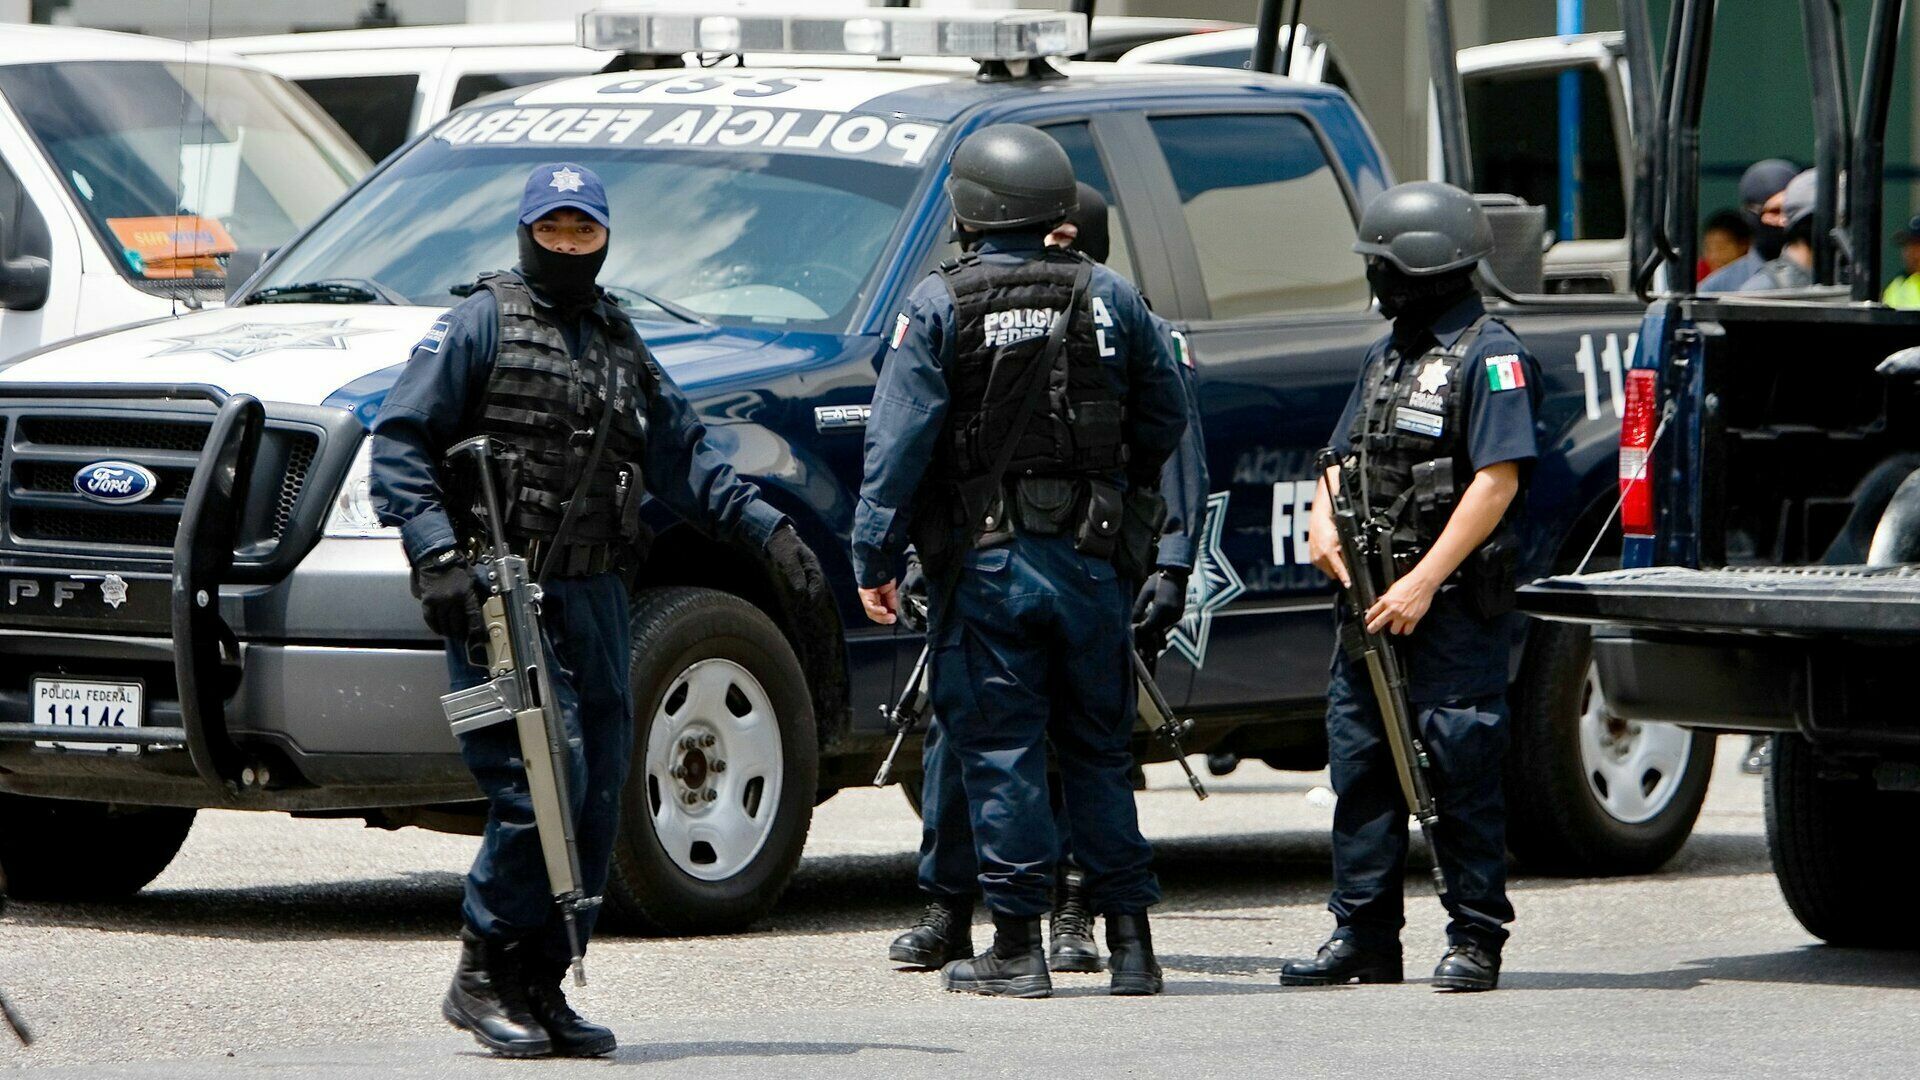 Bandits in Mexico shot and killed four employees of the radio station